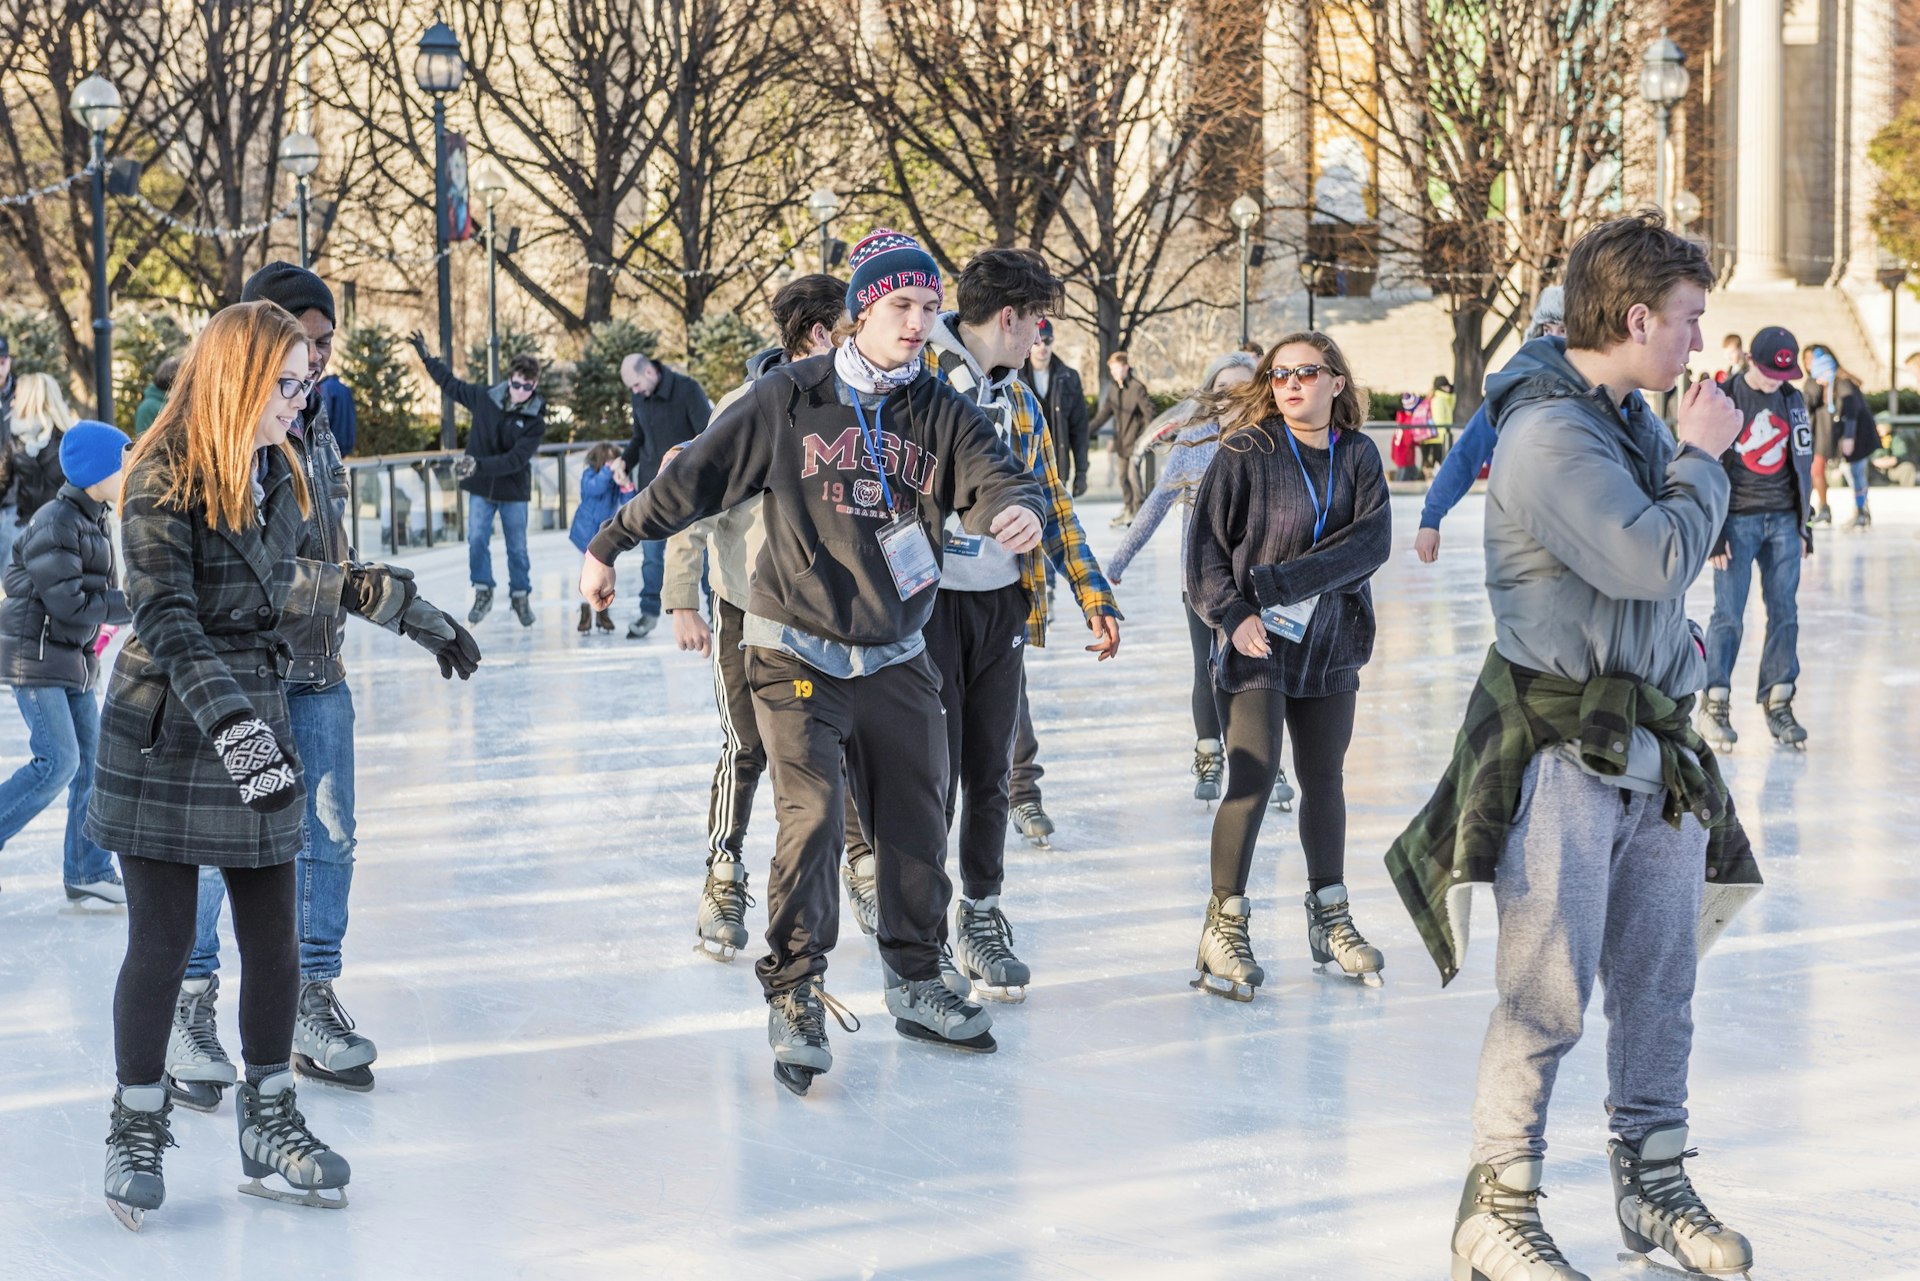 Many people skate on an ice rink at the National Gallery of Art in Washington, DC, on a sunny winter's day